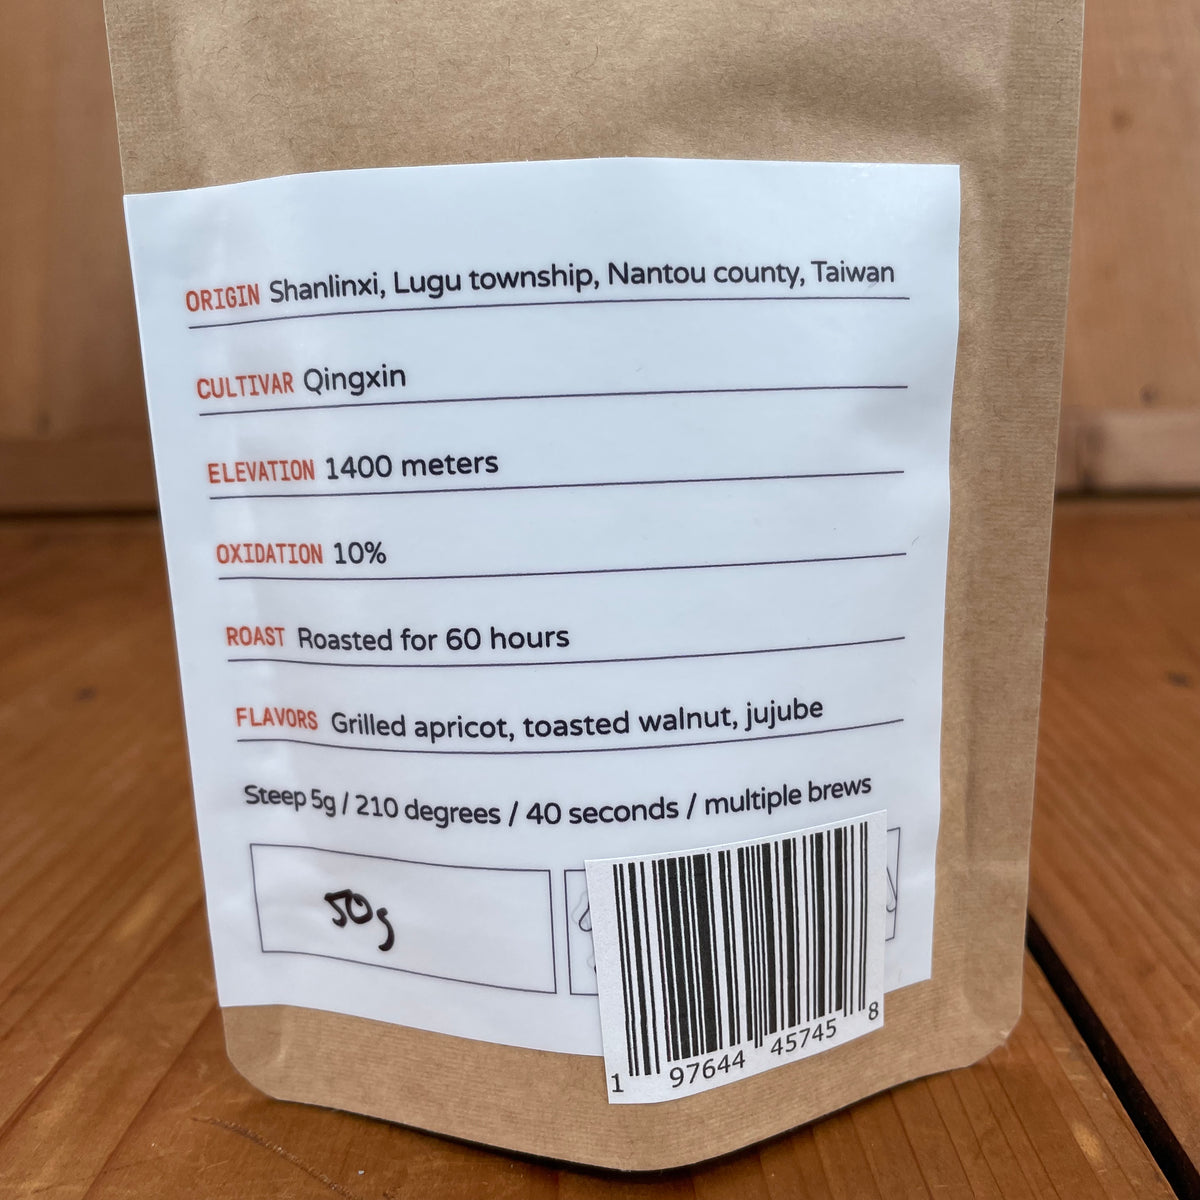 BANG tea Double Red Oolong (Spring 23) - 50g